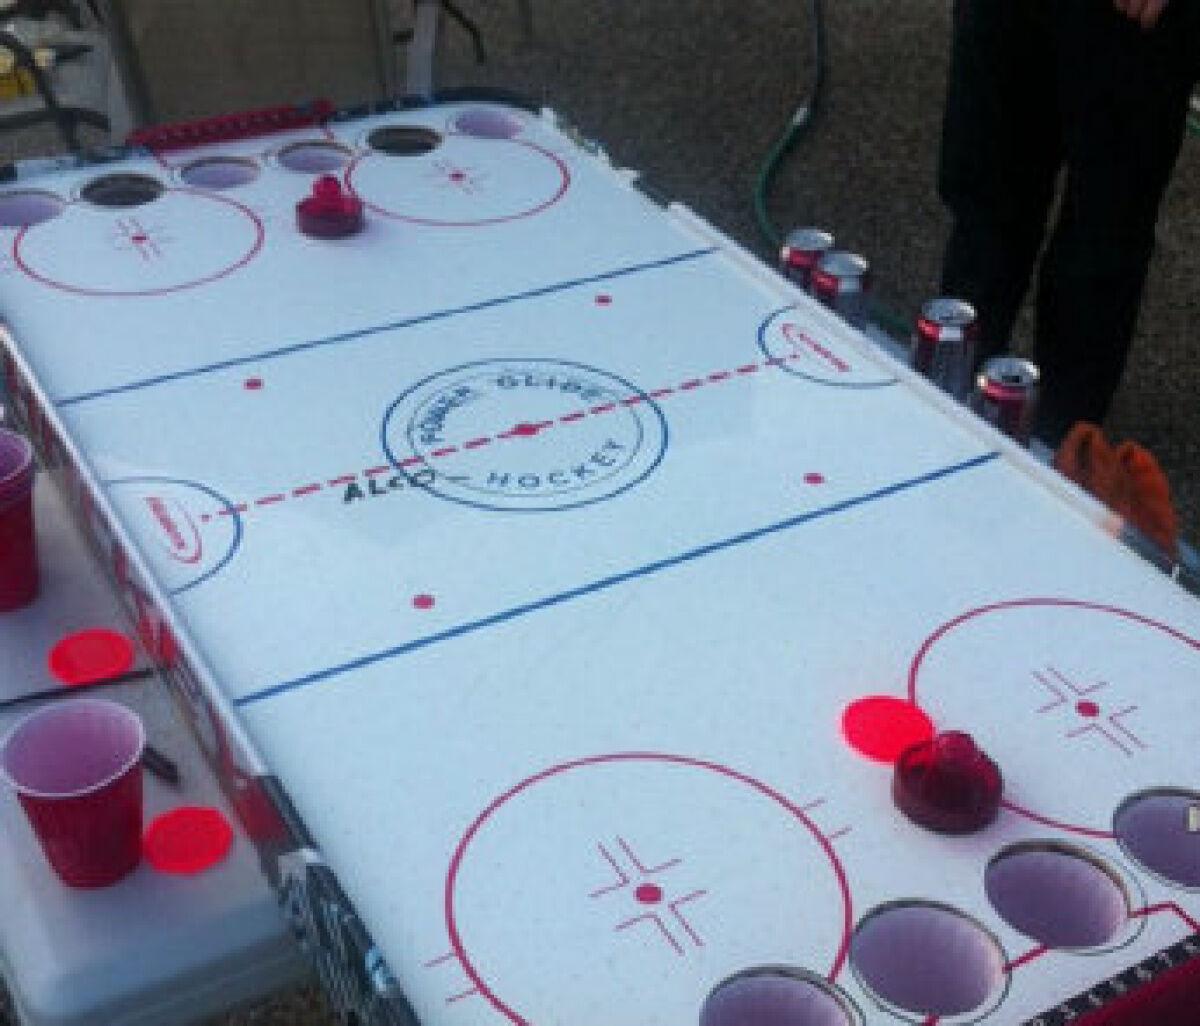 dana schaffer recommends air hockey drinking game pic